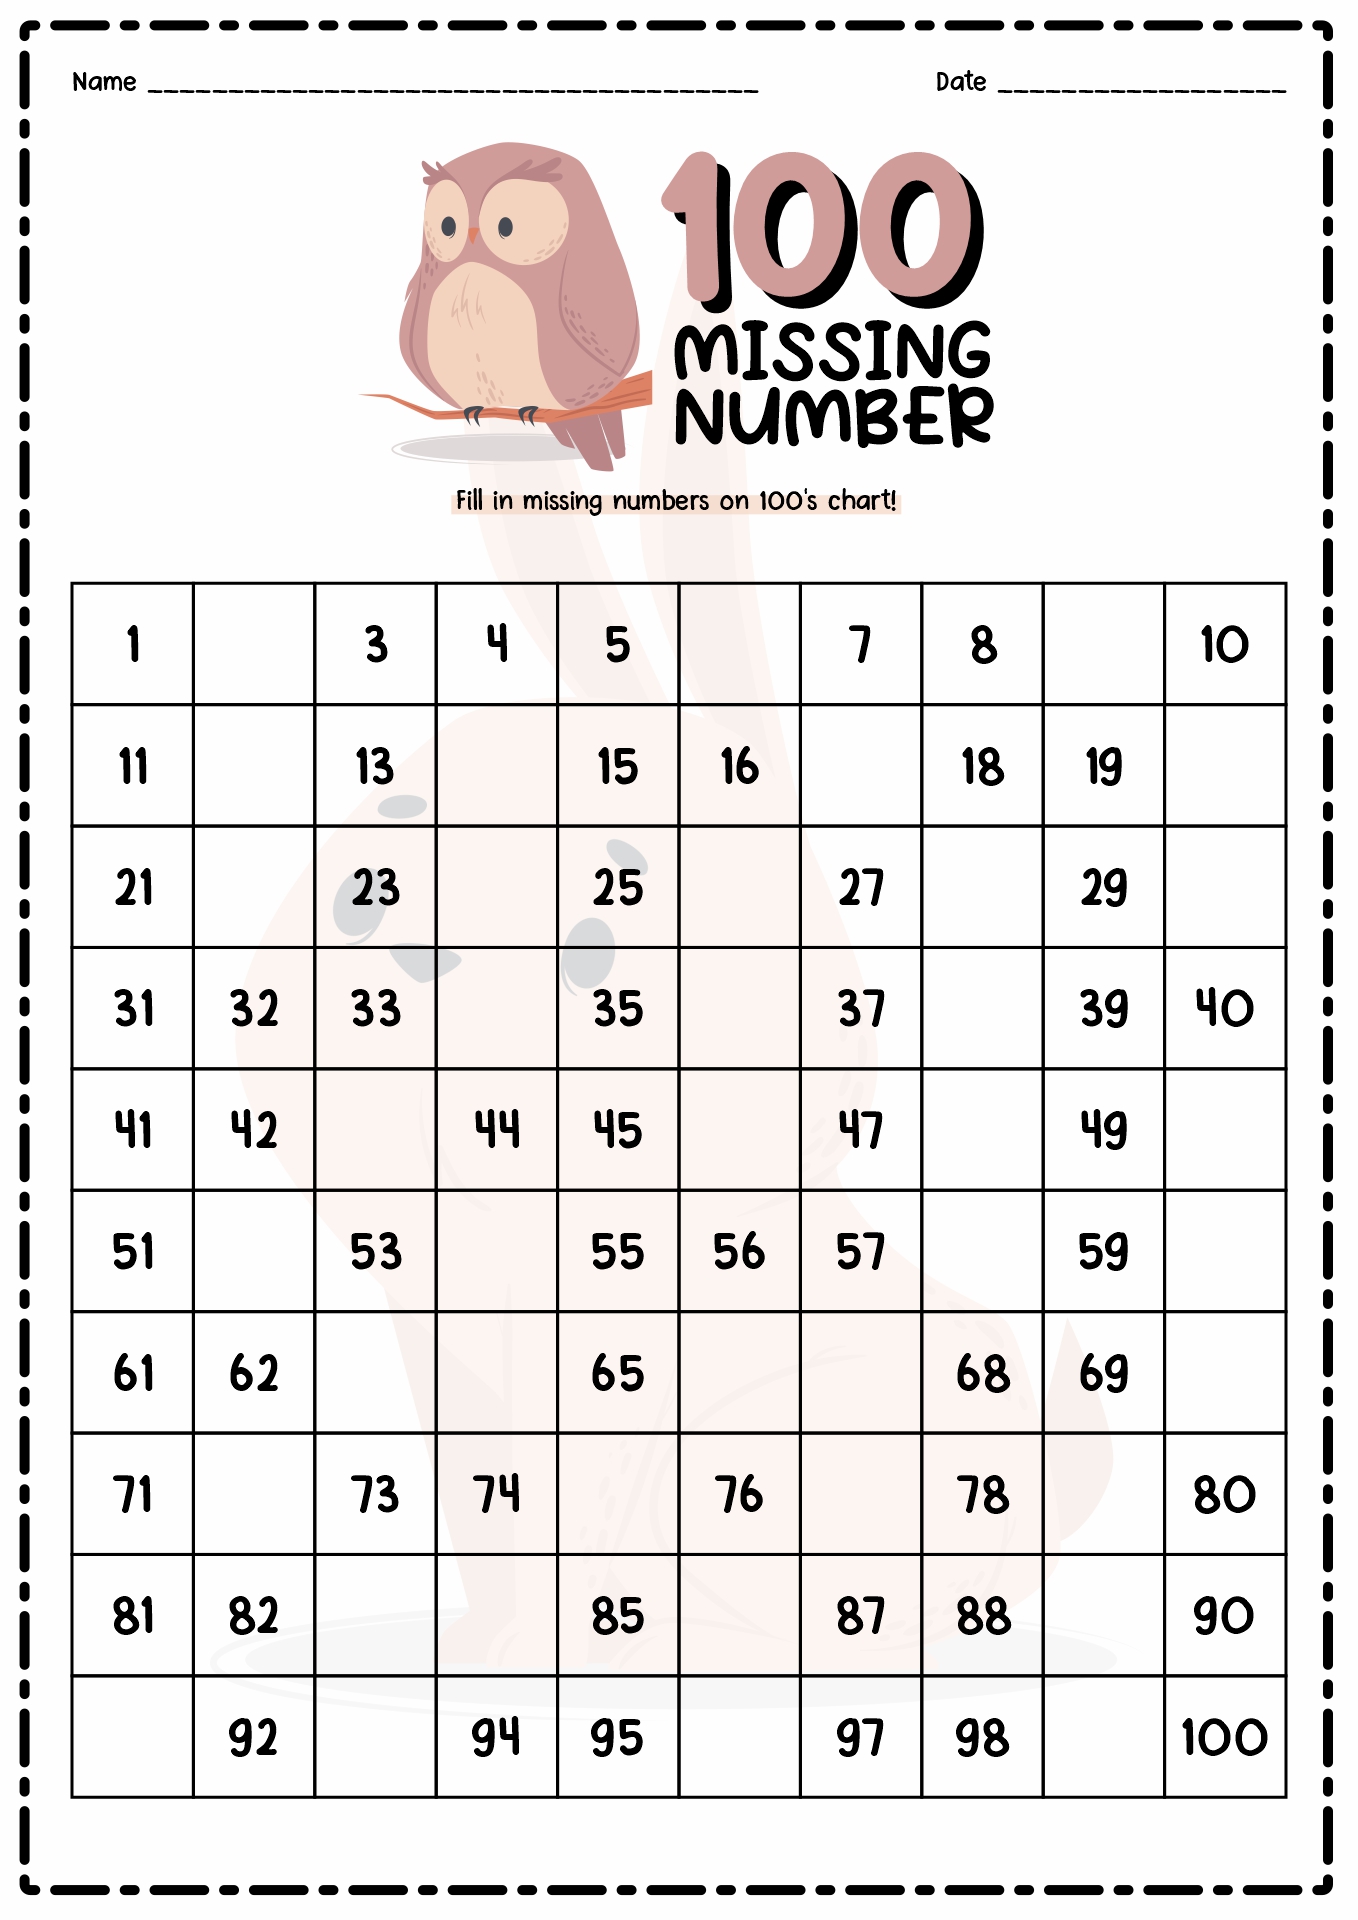 Hundreds Chart with Missing Numbers Image